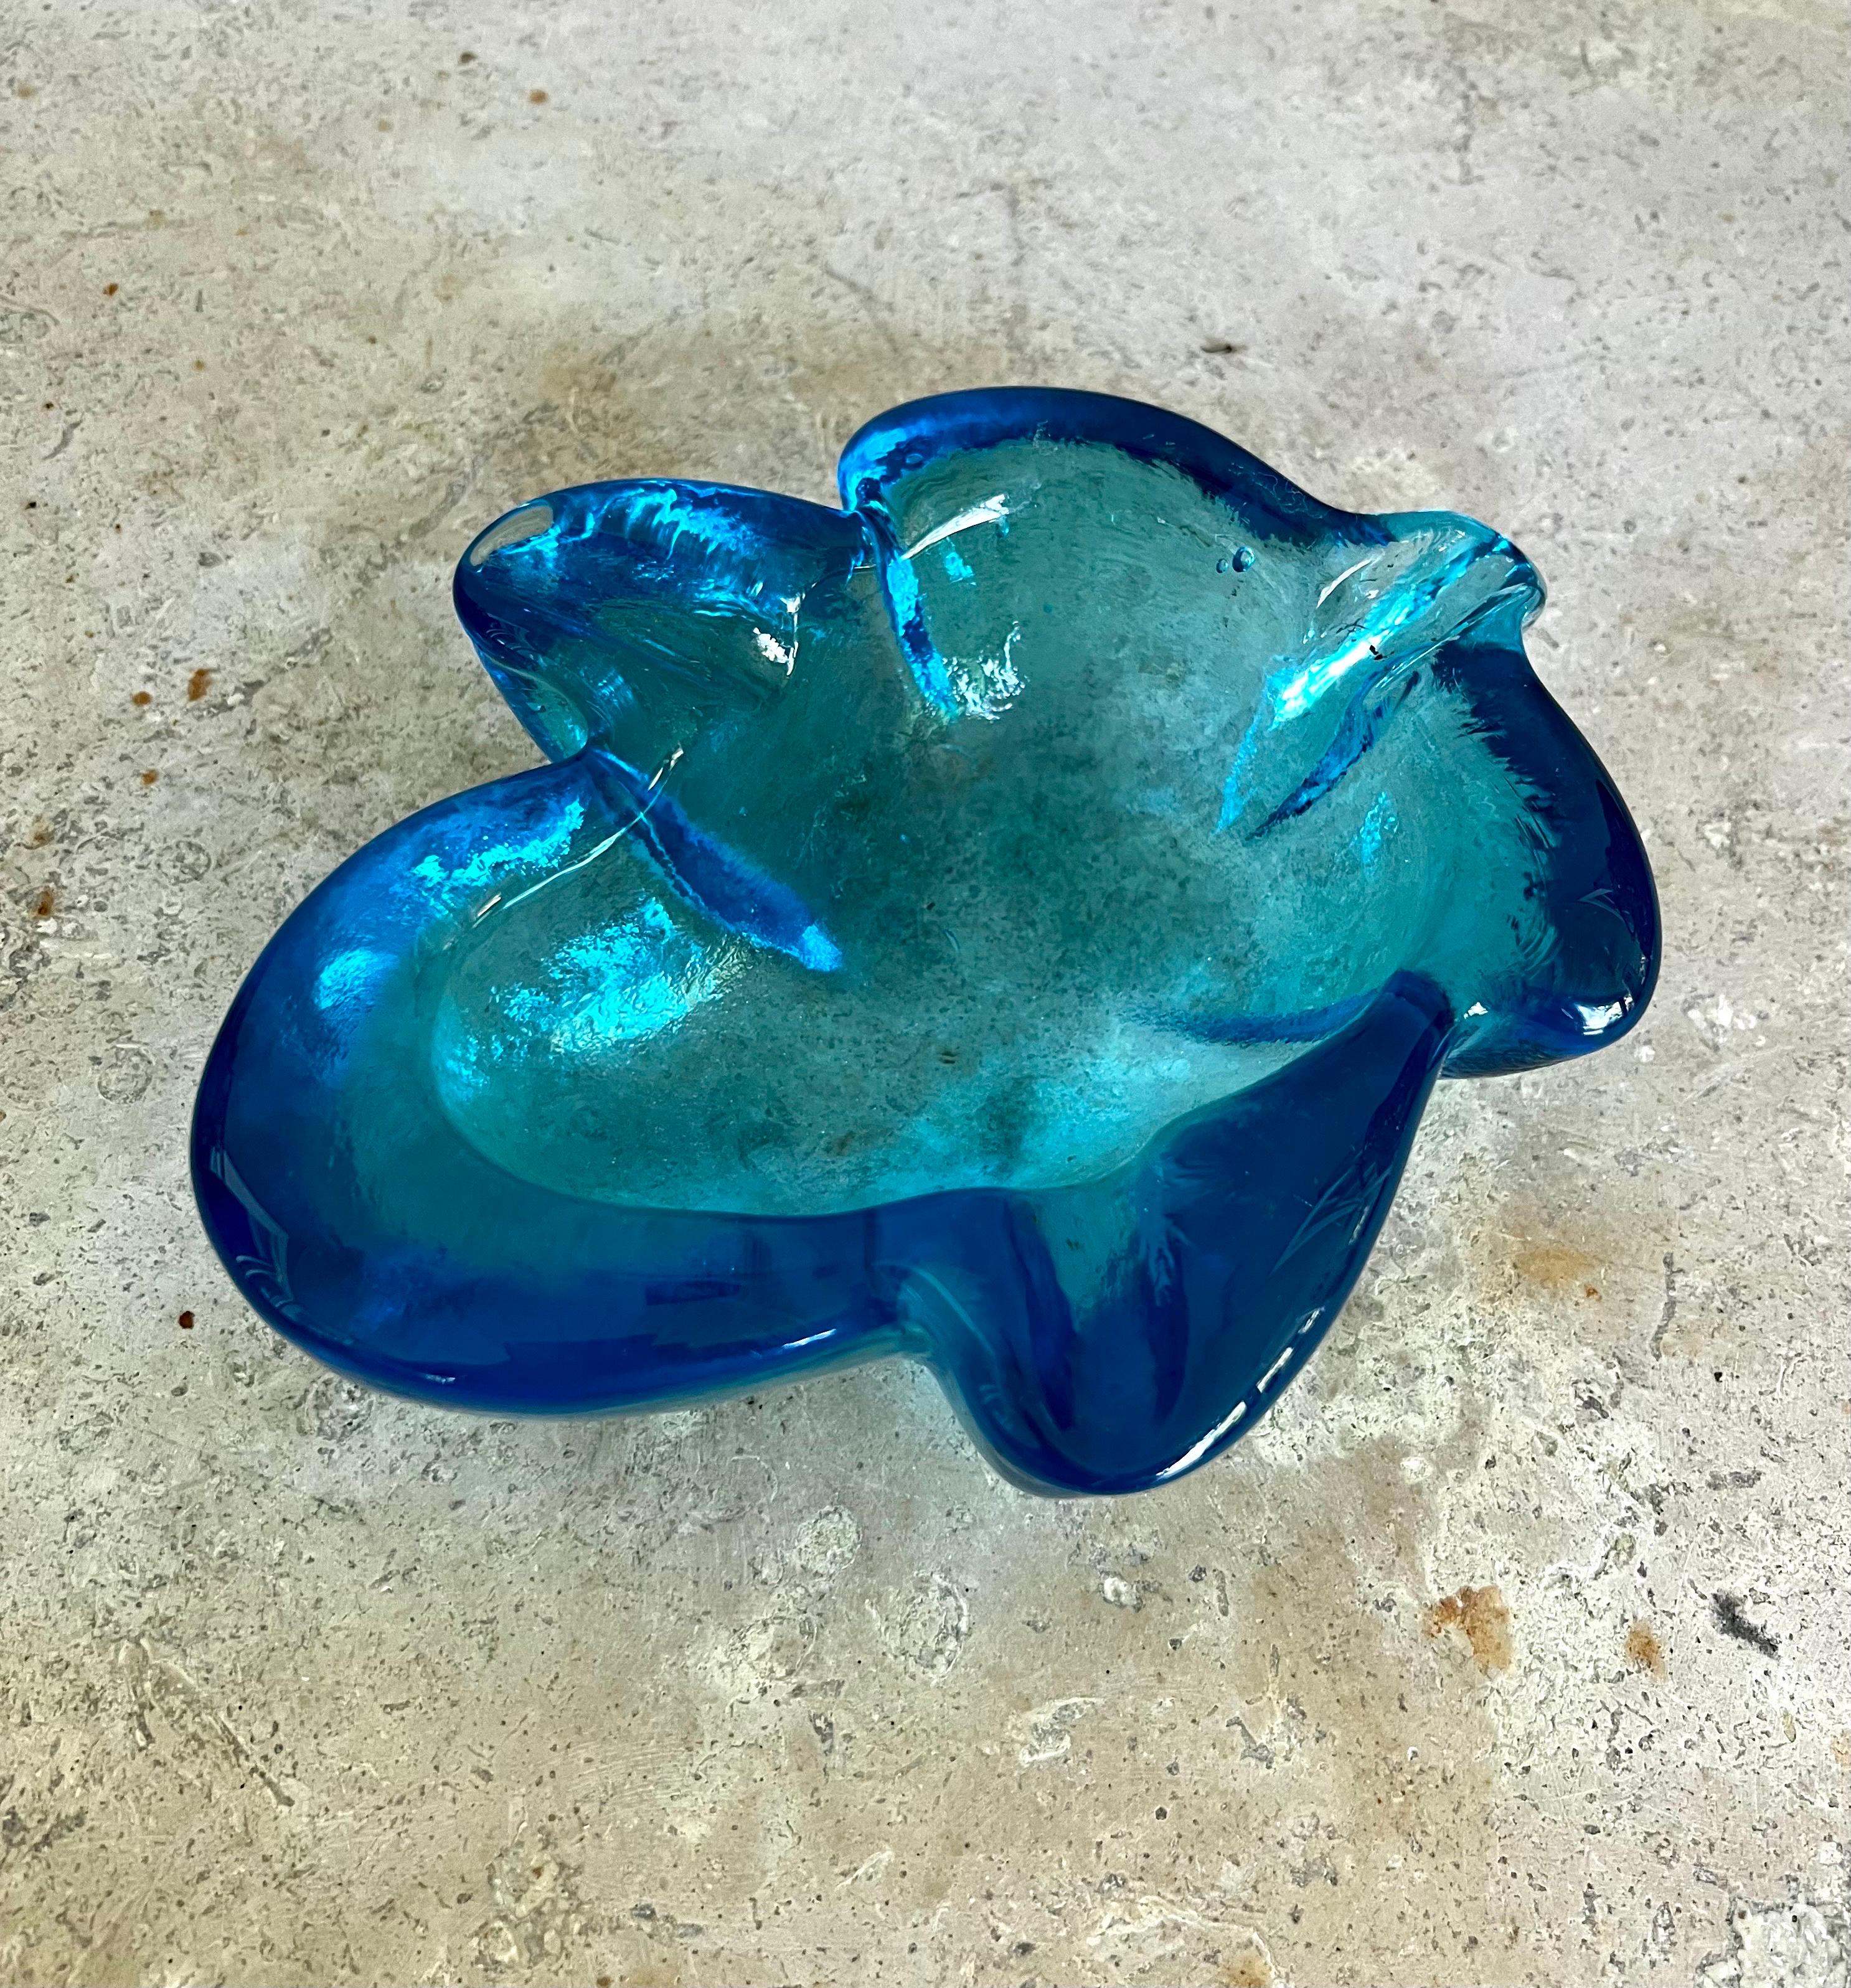 Stunning leaf design glass ashtray/catch-all dish, the color is a beautiful deep turquoise 
Perfect to style a coffee table, bookcase or entry table.